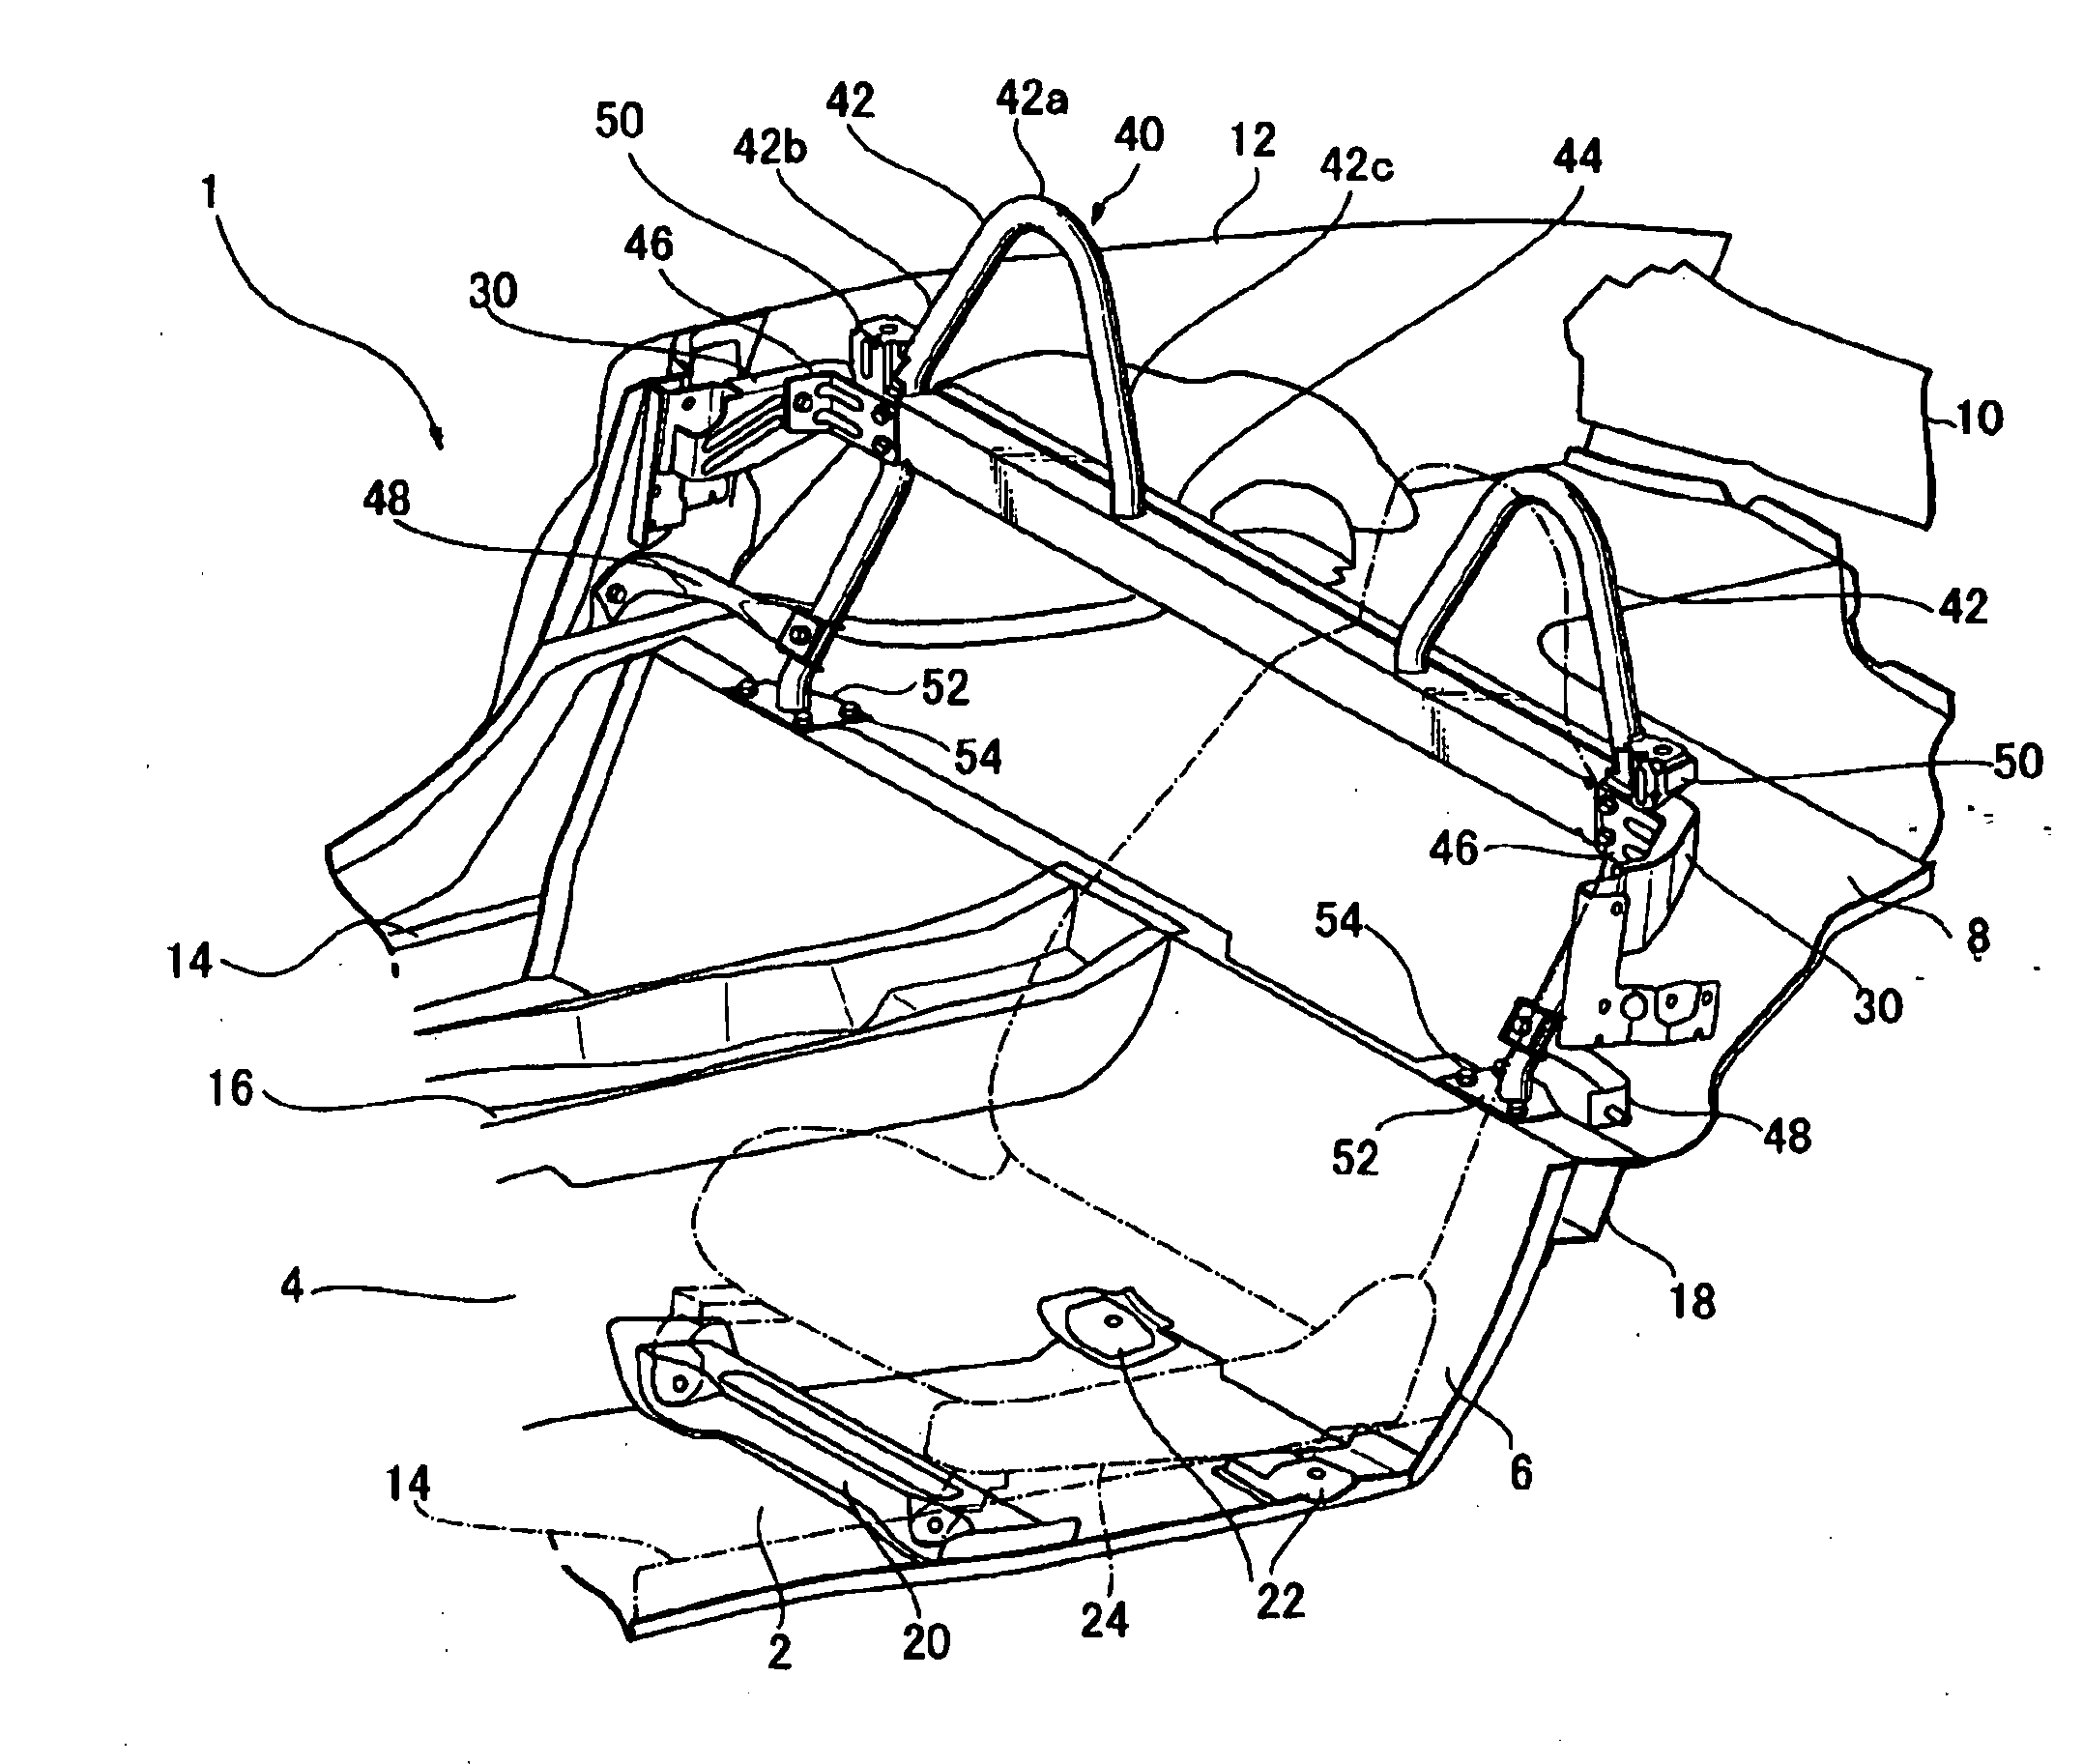 Roll bar structure of vehicle